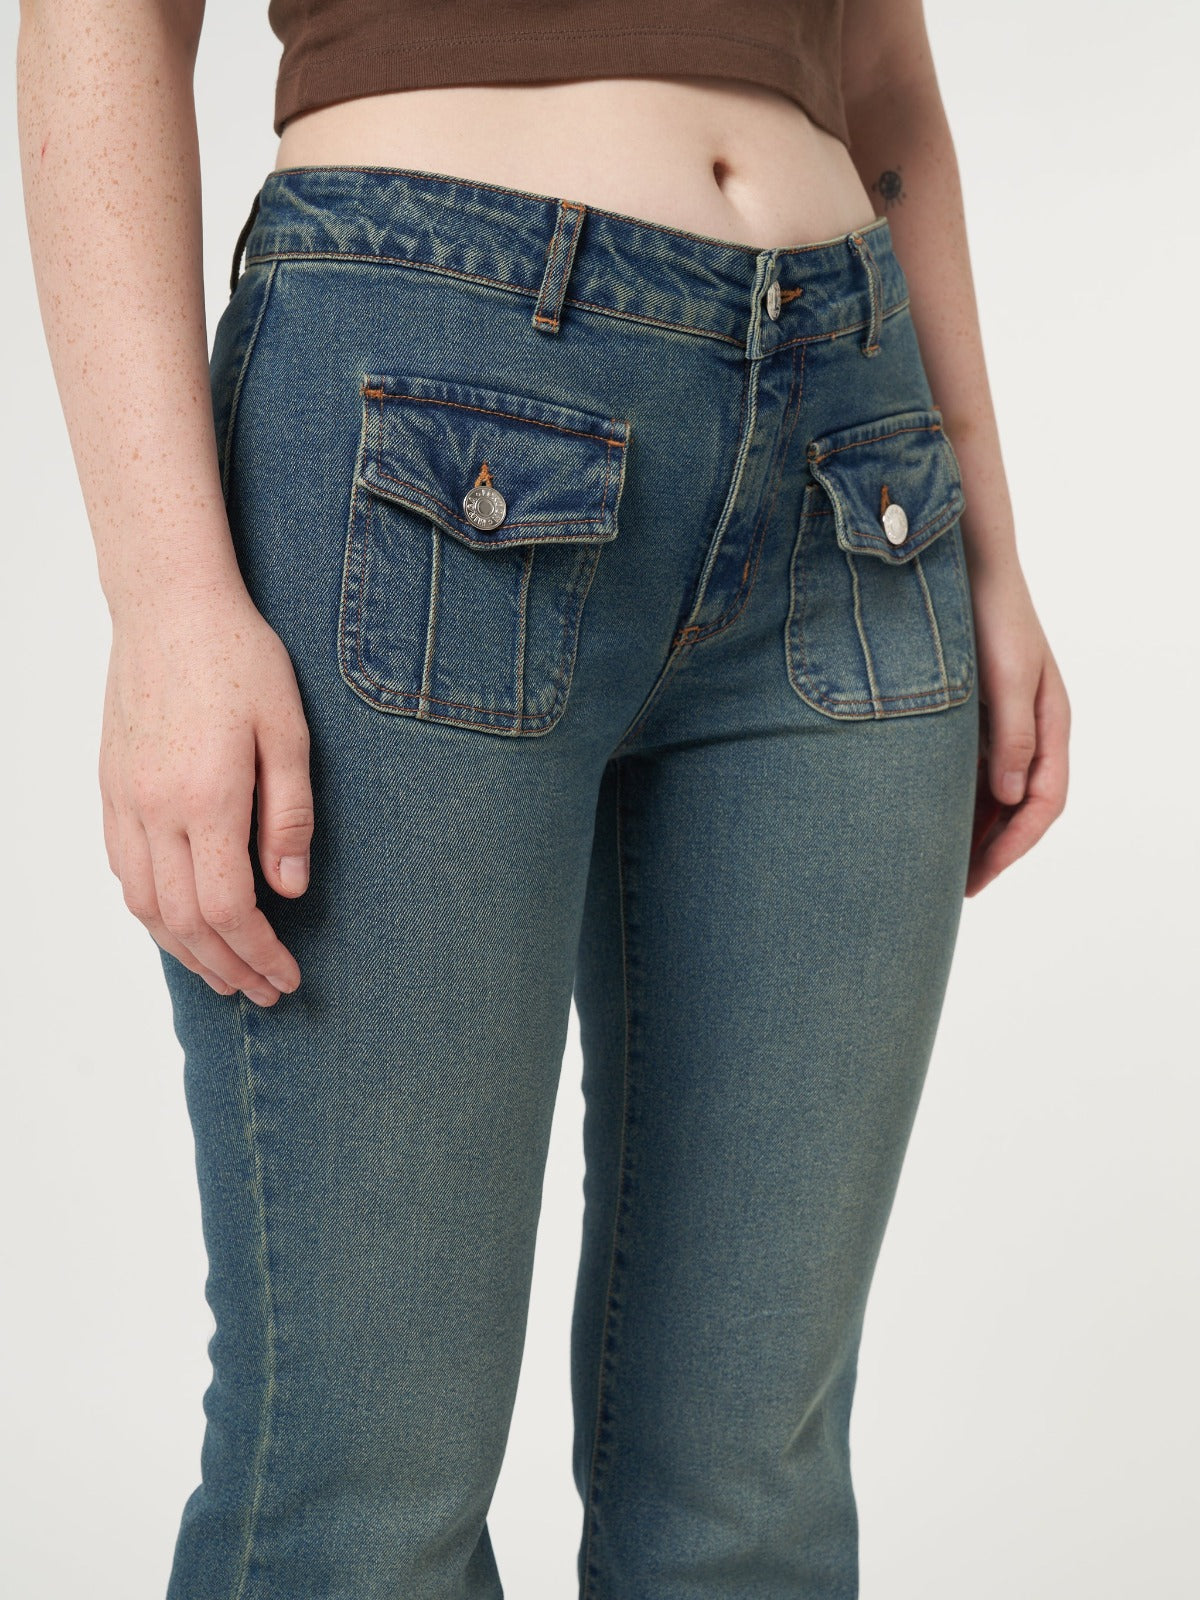 Low rise flare jeans with mini front pockets and vintage green overdye wash